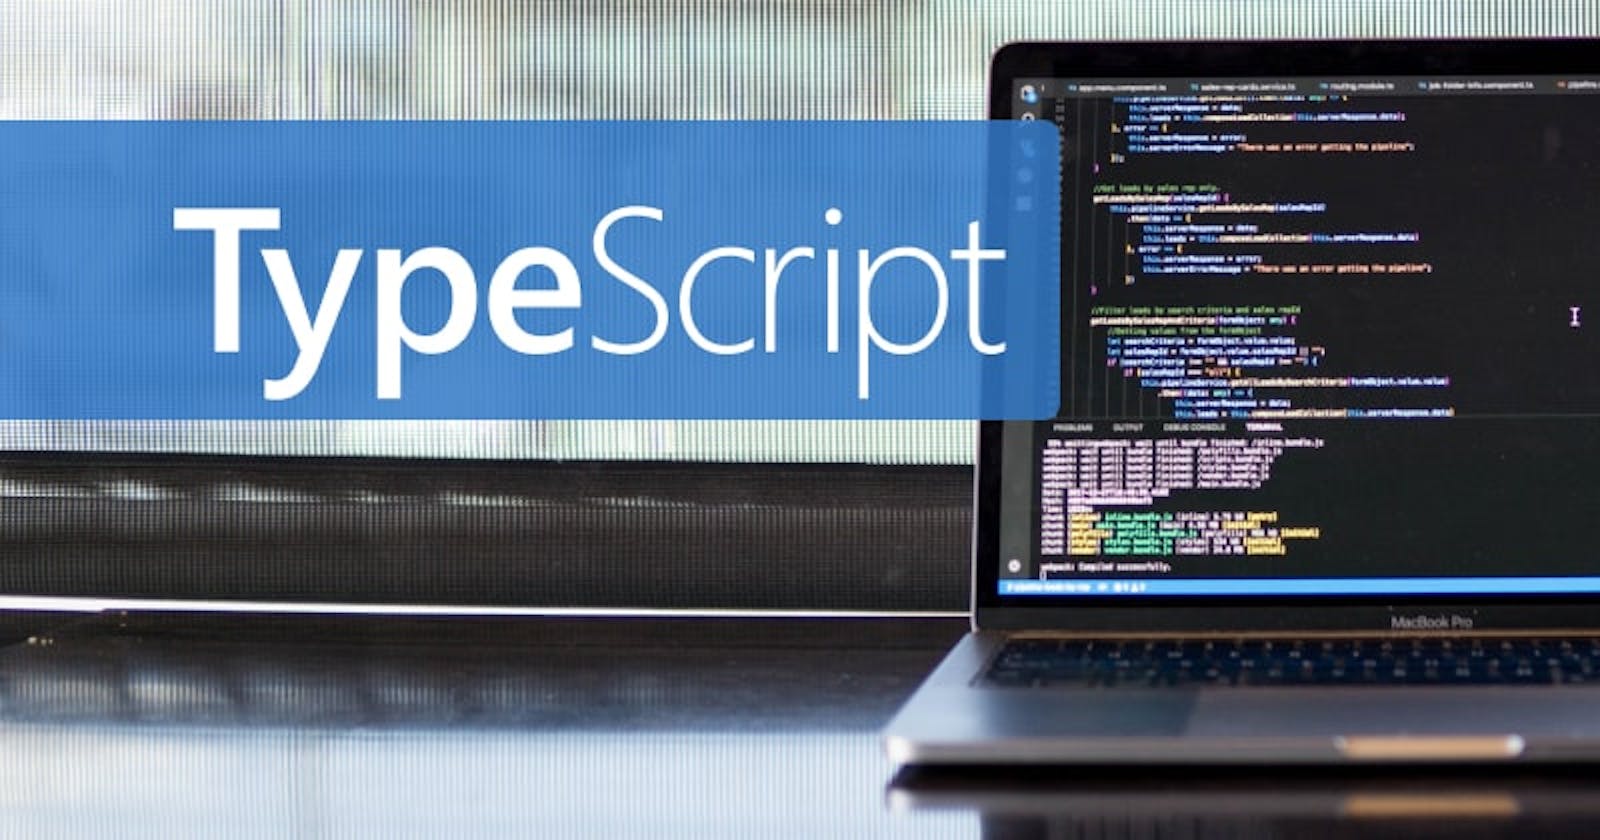 Old Habits Die Hard, But Getting New Ones is Essential. Tips on Getting the Most Out of TypeScript